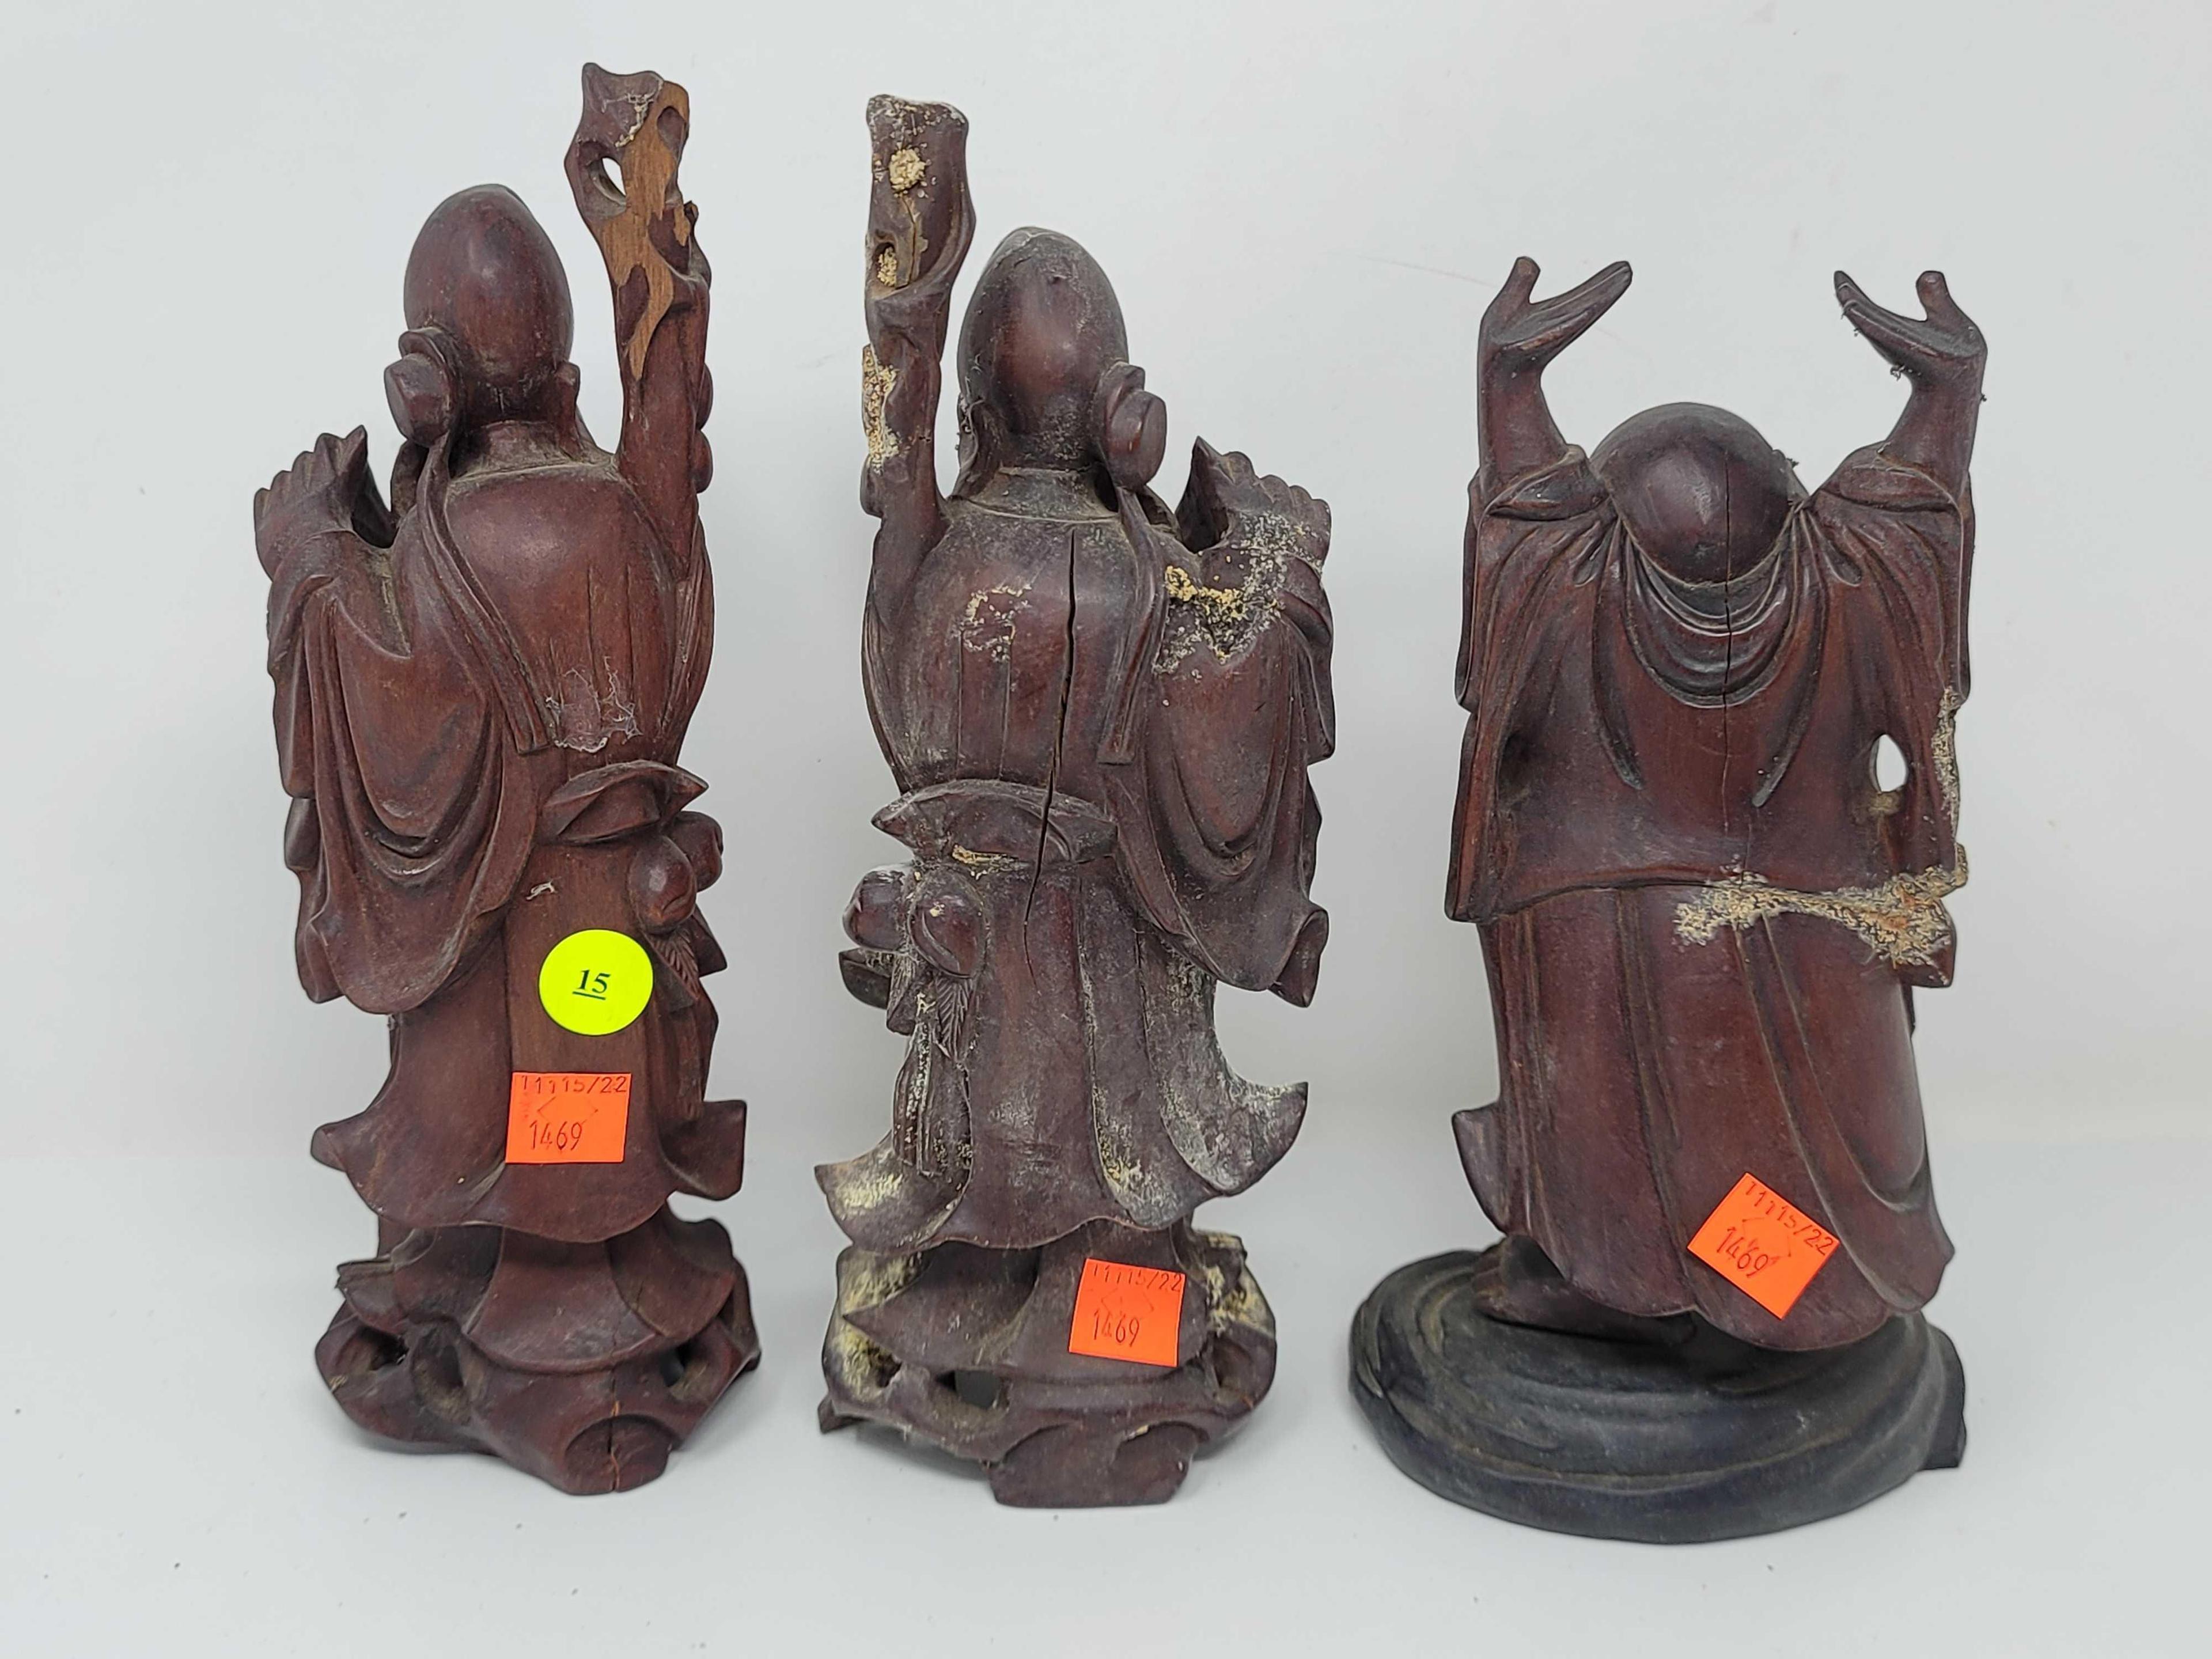 LOT OF 4 WOOD CARVED MAHOGANY ORIENTAL FIGURINES 1 IS 6 INCHES TALL AND 3 ARE 10 INCHES TALL